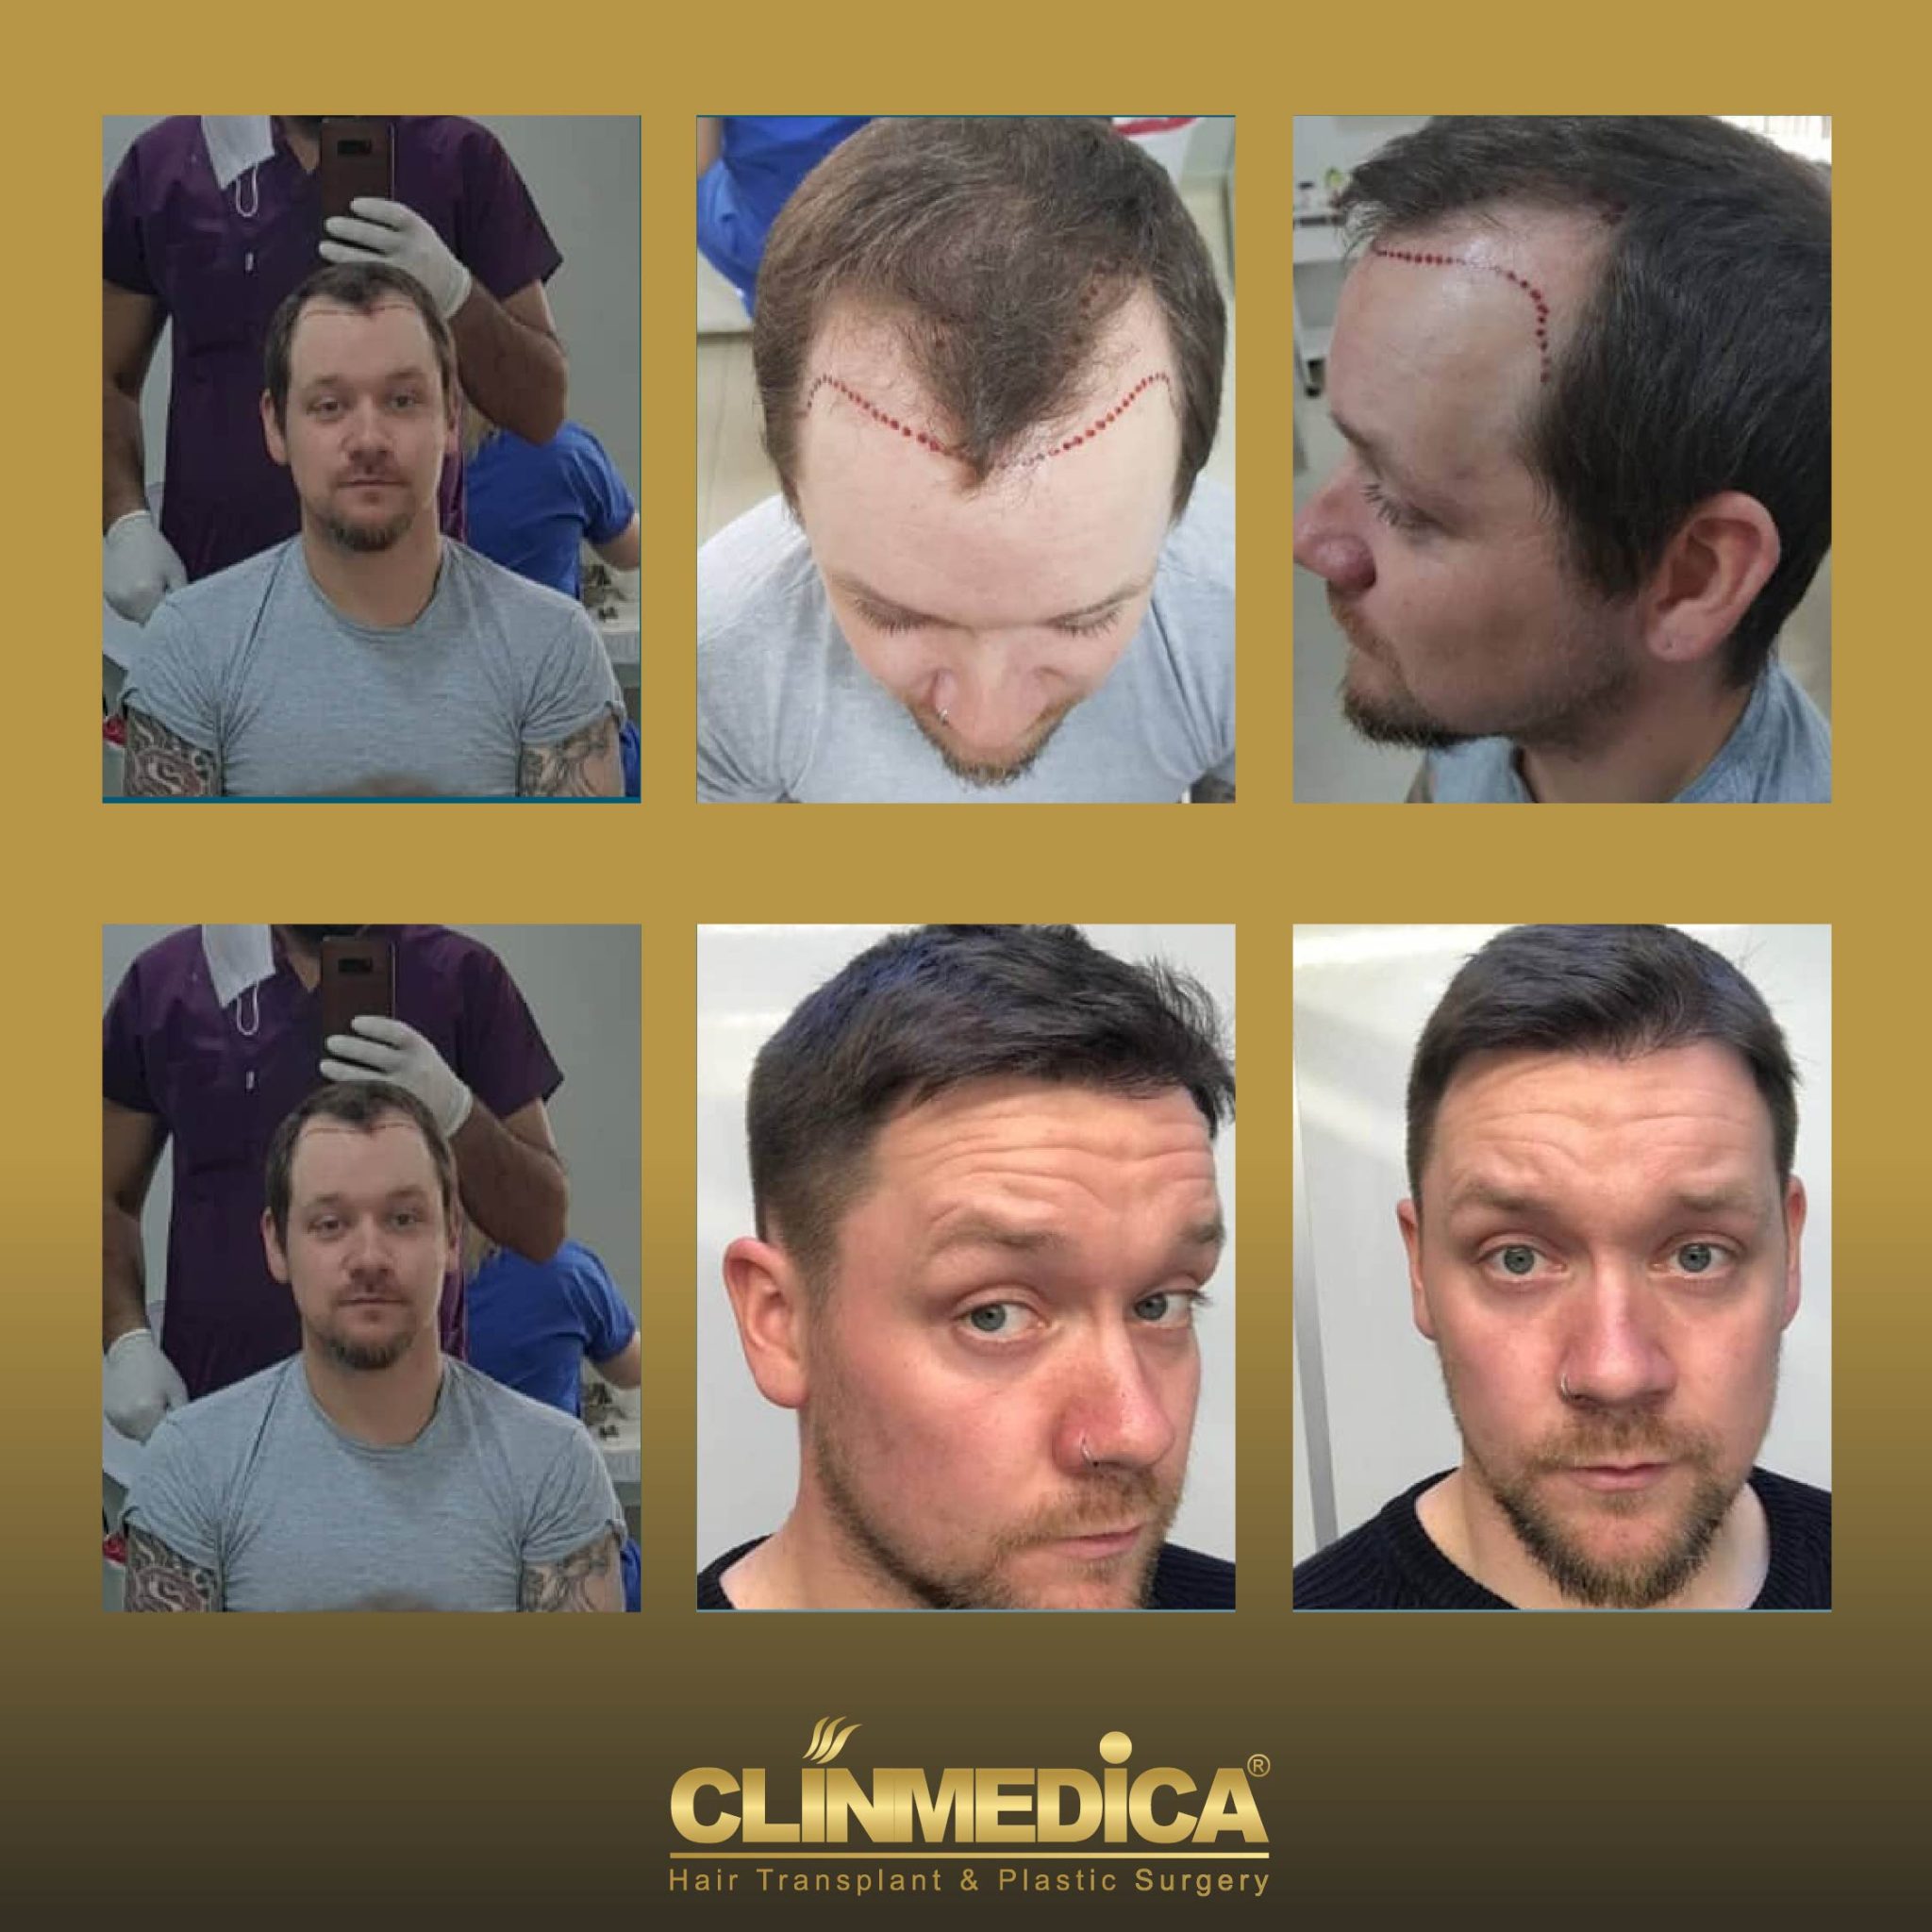 hair transplant before and after in Turkey